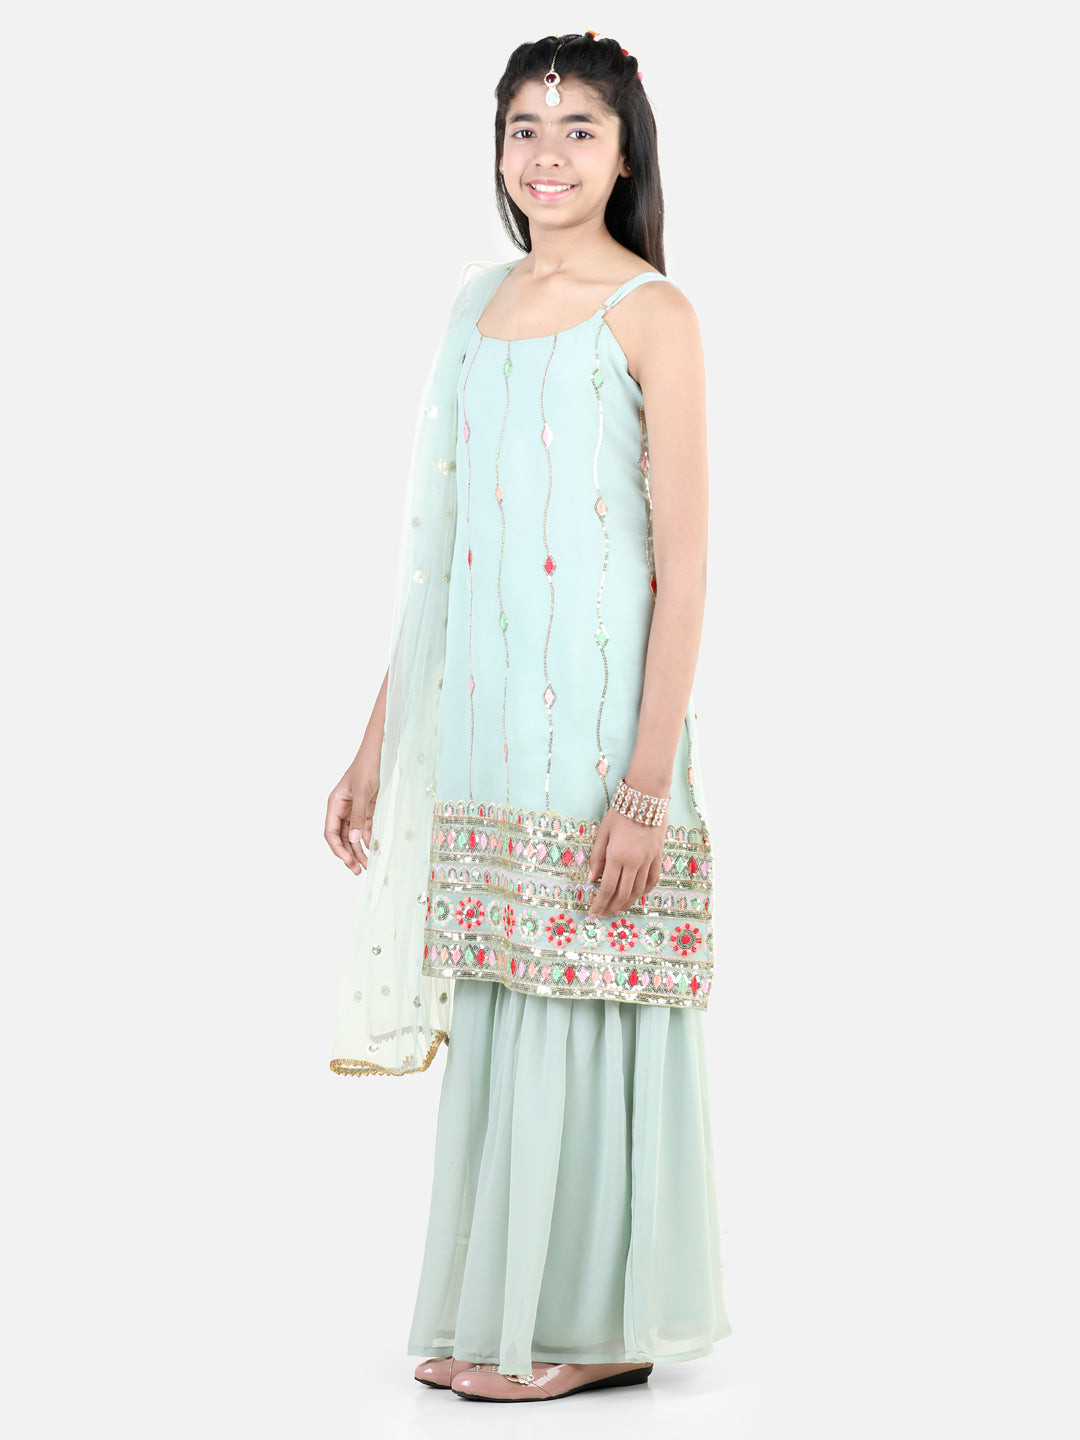 BownBee Traditional Wear Special Sleeveless Floral Embroidered Lace Detailed Kurta Sharara With Dupatta - Blue